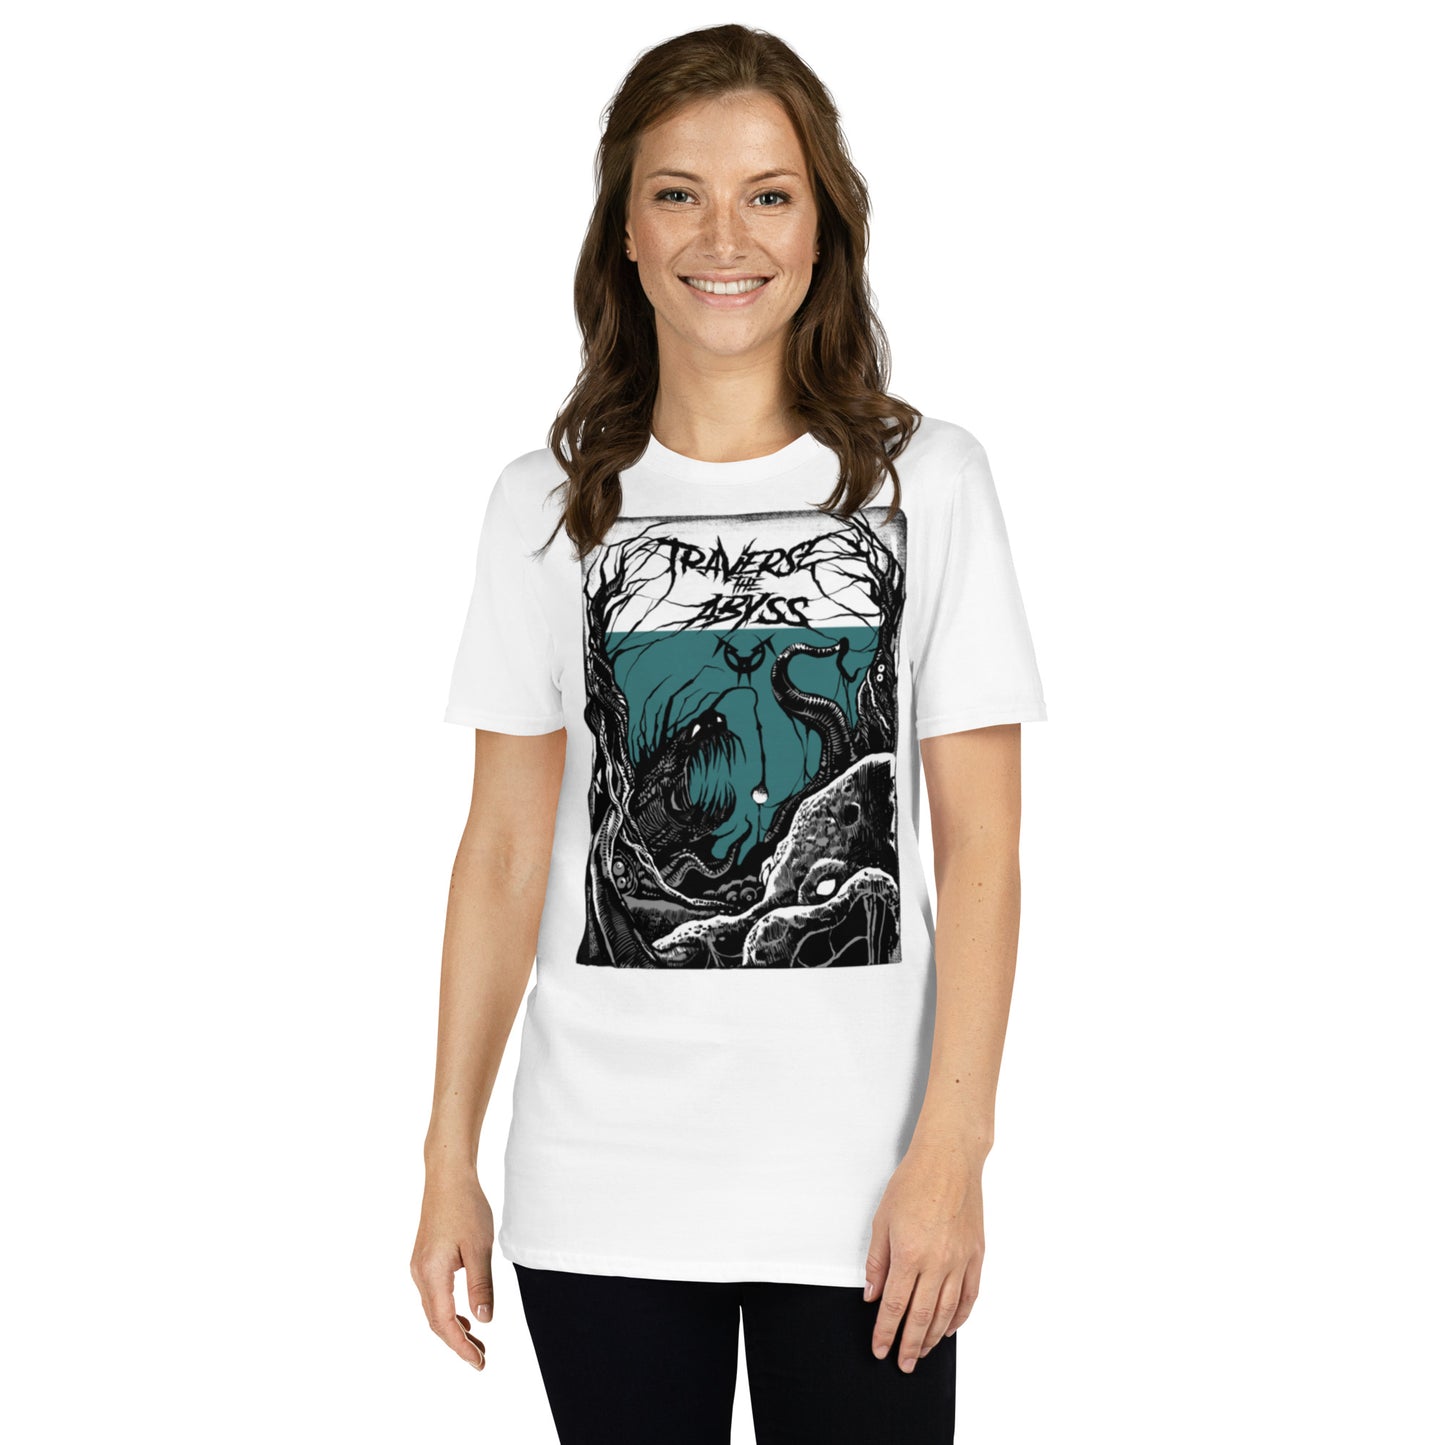 Traverse the Abyss - The Depths Short-Sleeve Unisex T-Shirt